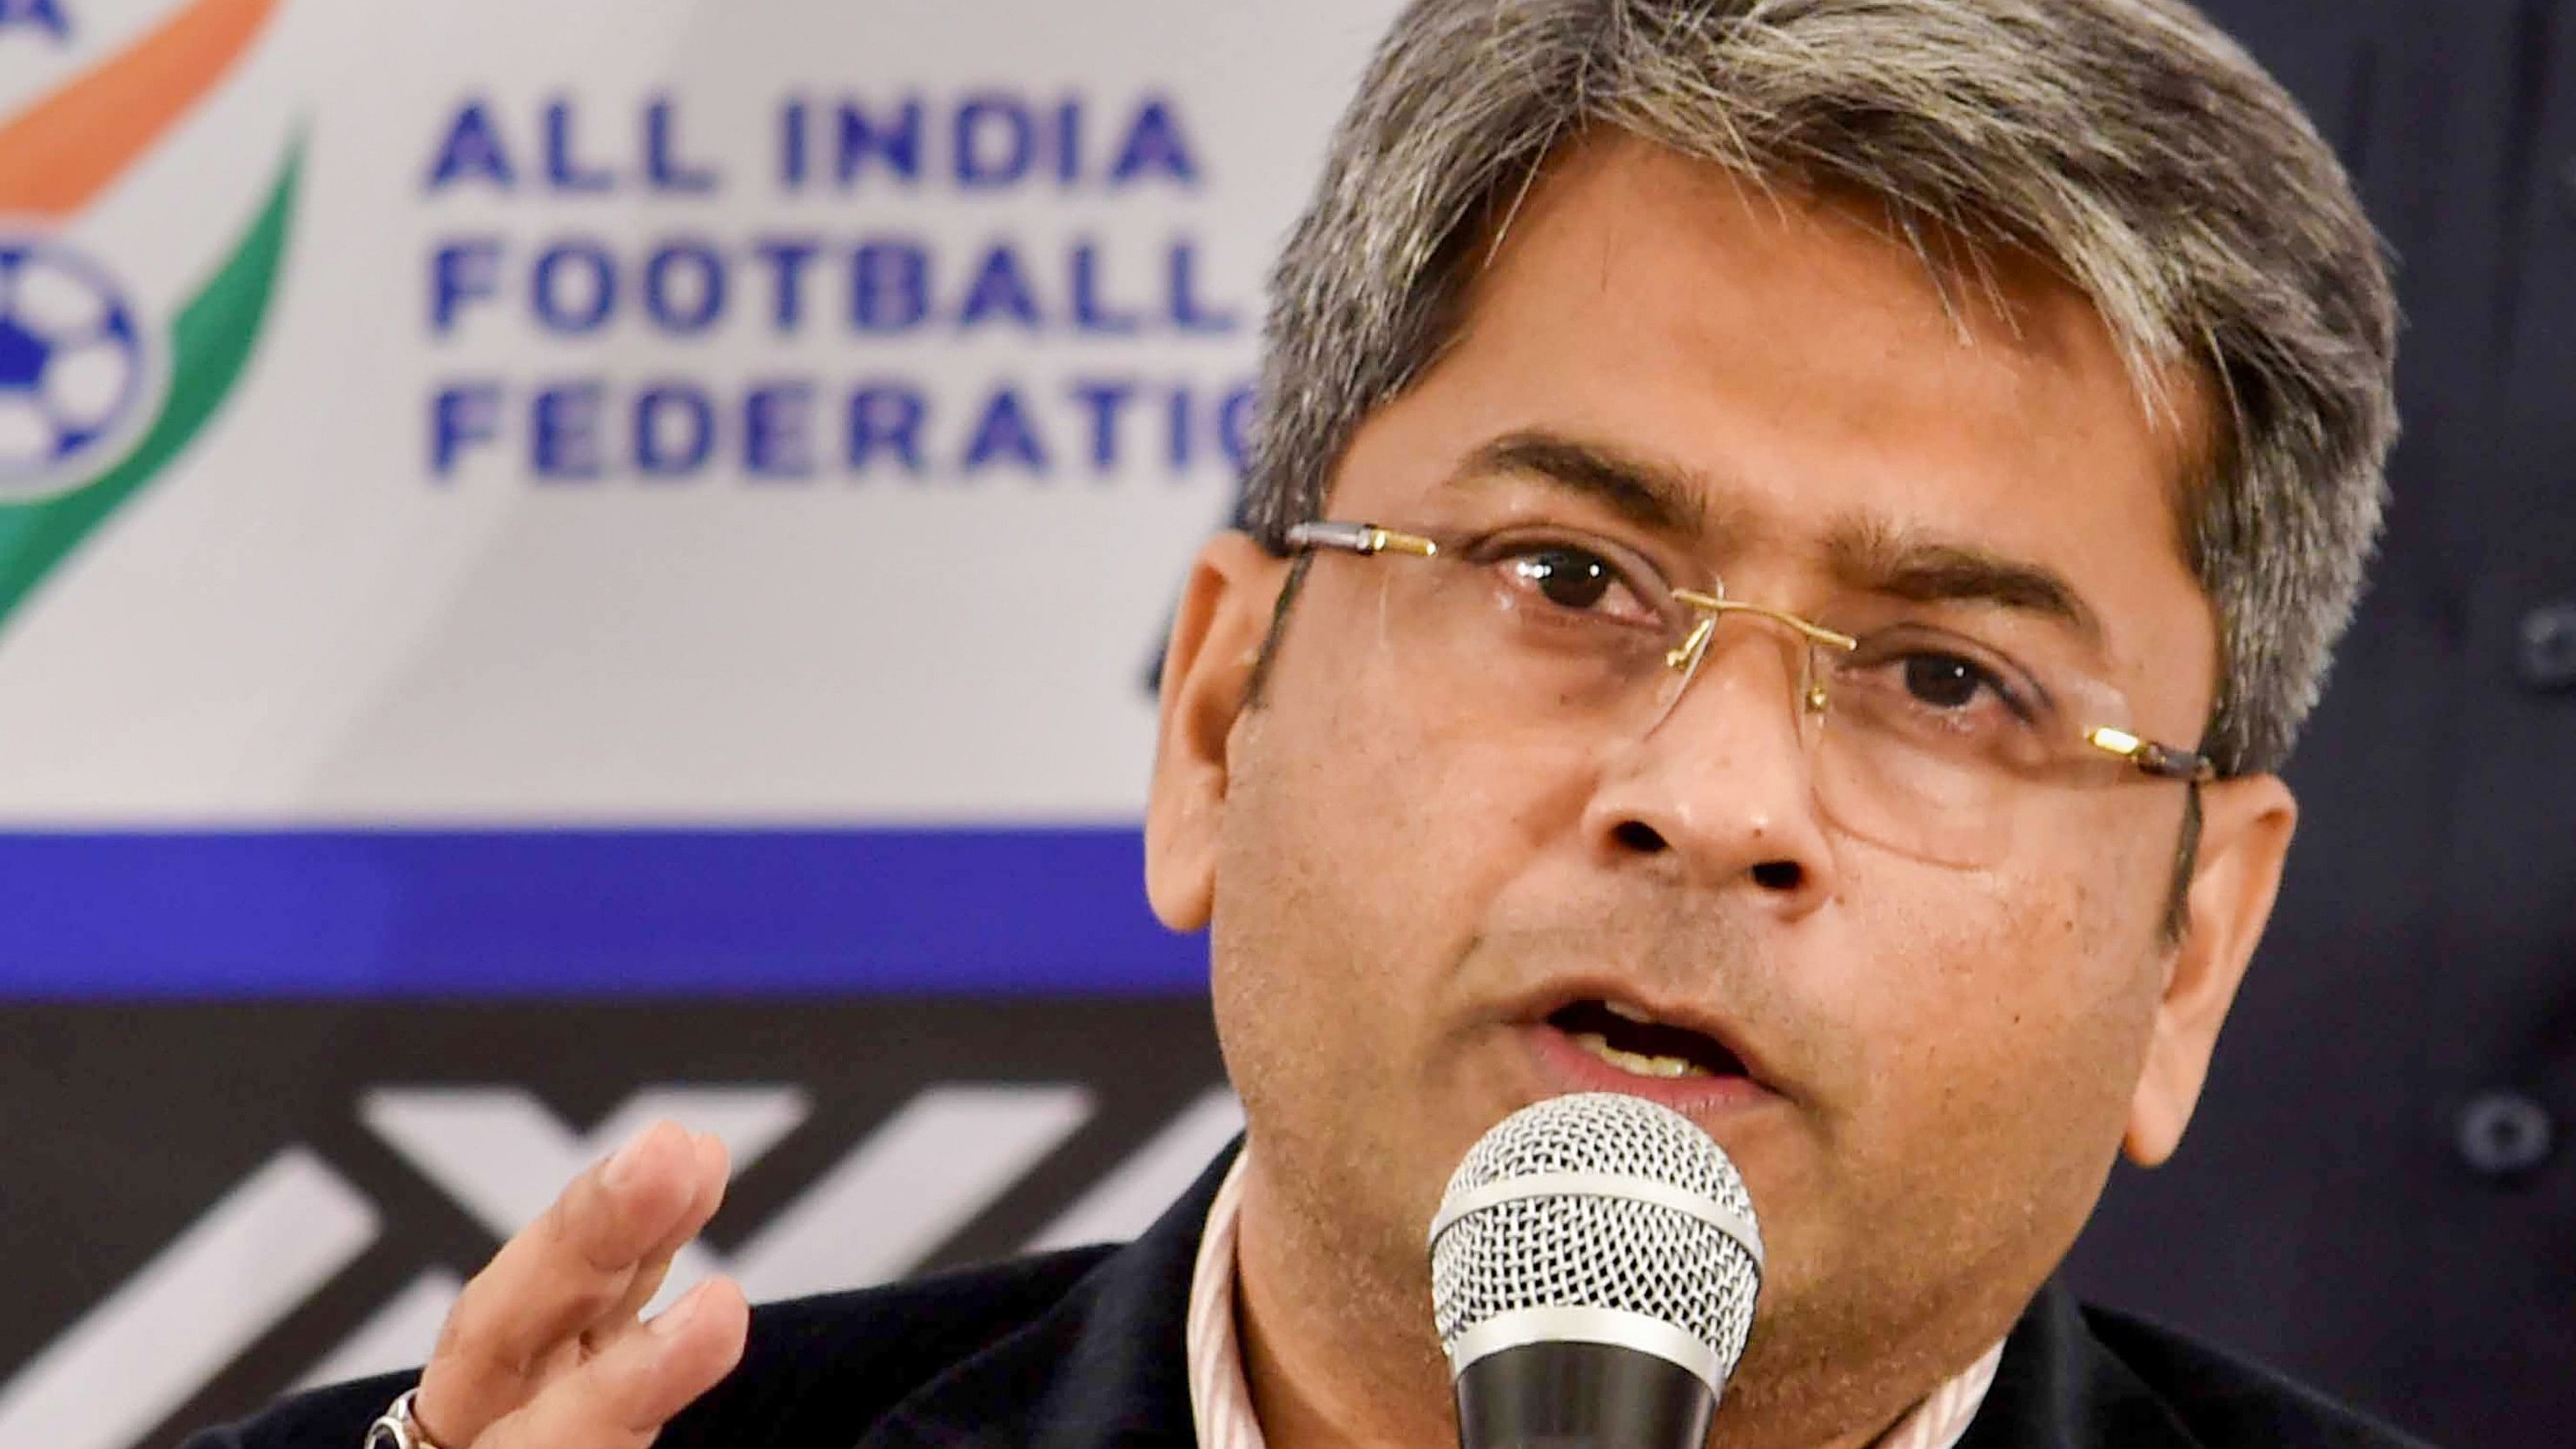 <div class="paragraphs"><p>The AIFF has also been plagued by controversies of late with accusations of corruption against its President Kalyan Chaubey.</p></div>